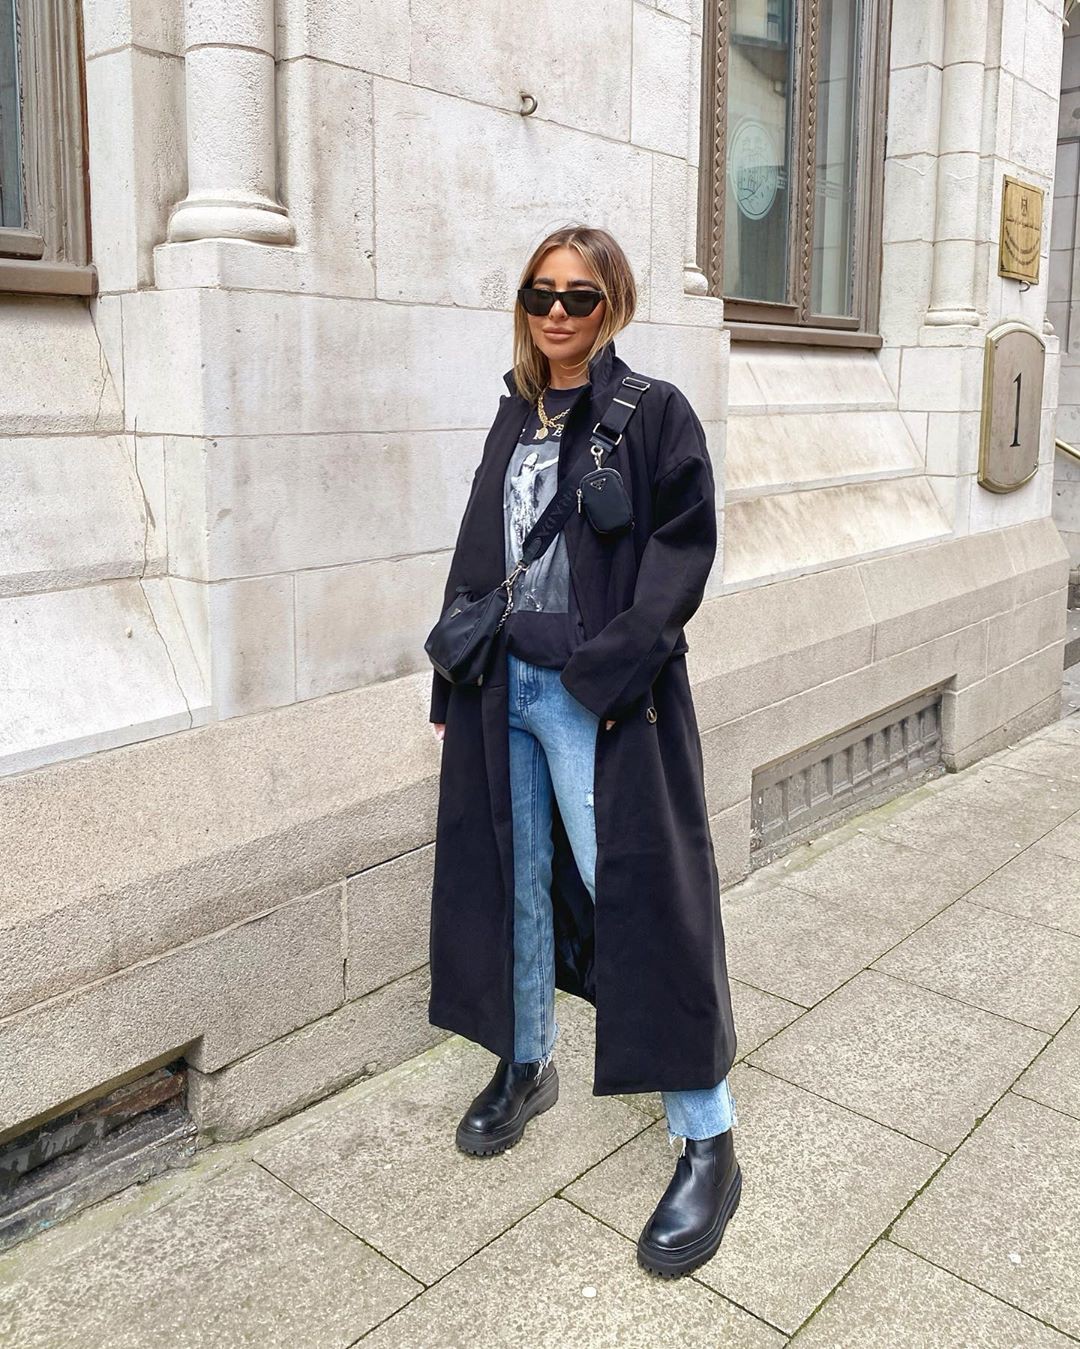 20 Outfit Ideas With Denim Trench Coats - Styleoholic